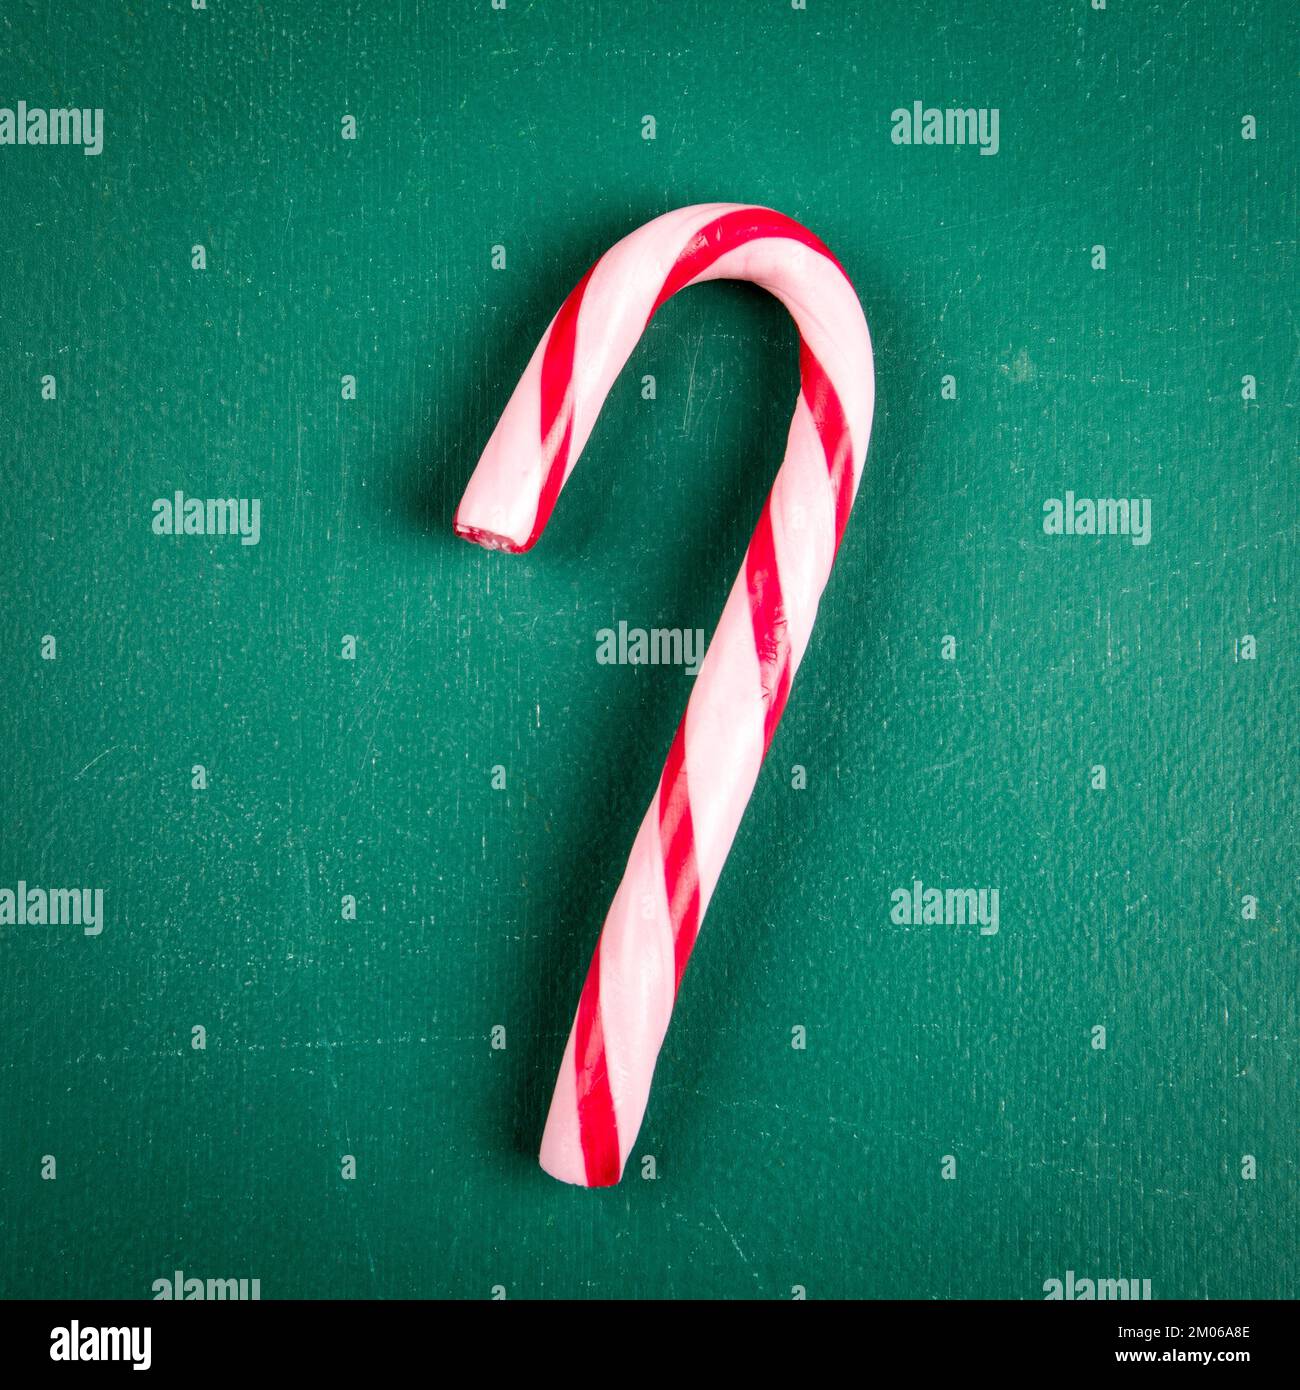 Christmas sweets and traditions. Green chalkboard background. Stock Photo